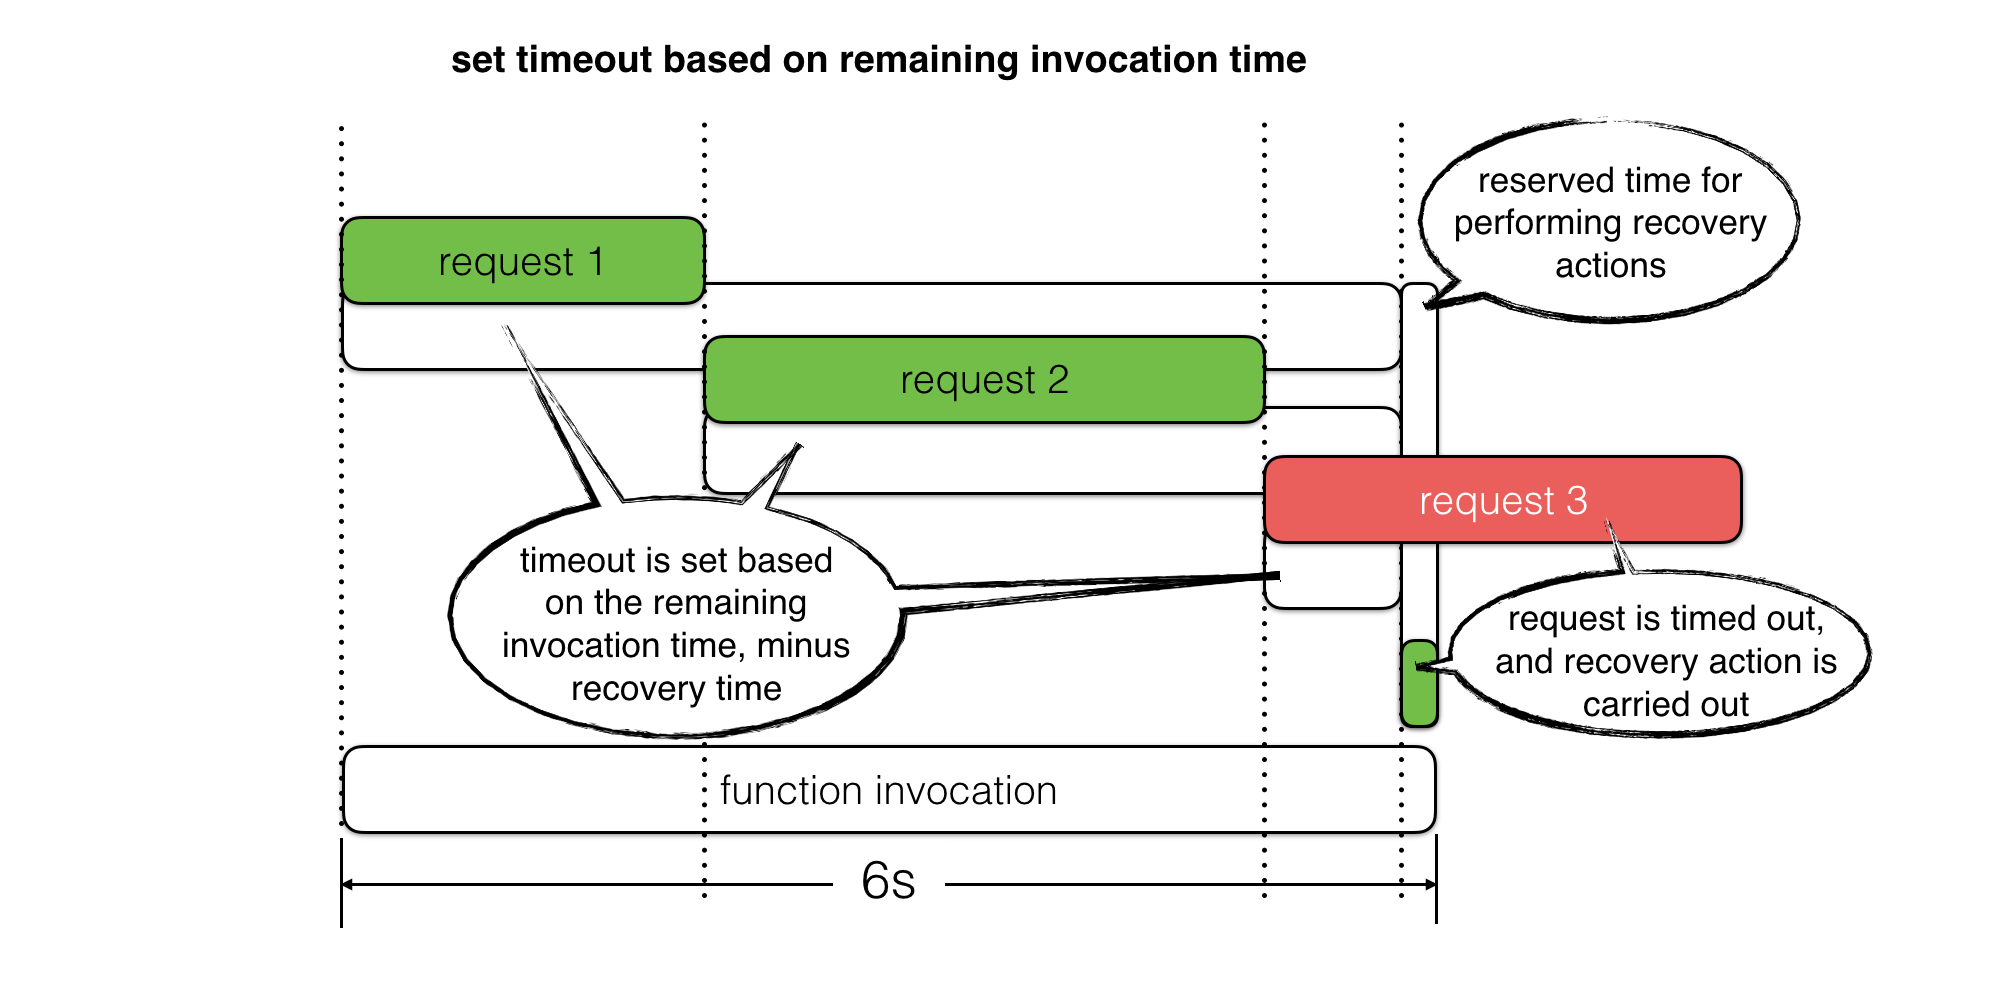 set timeout based on remaining invocation time